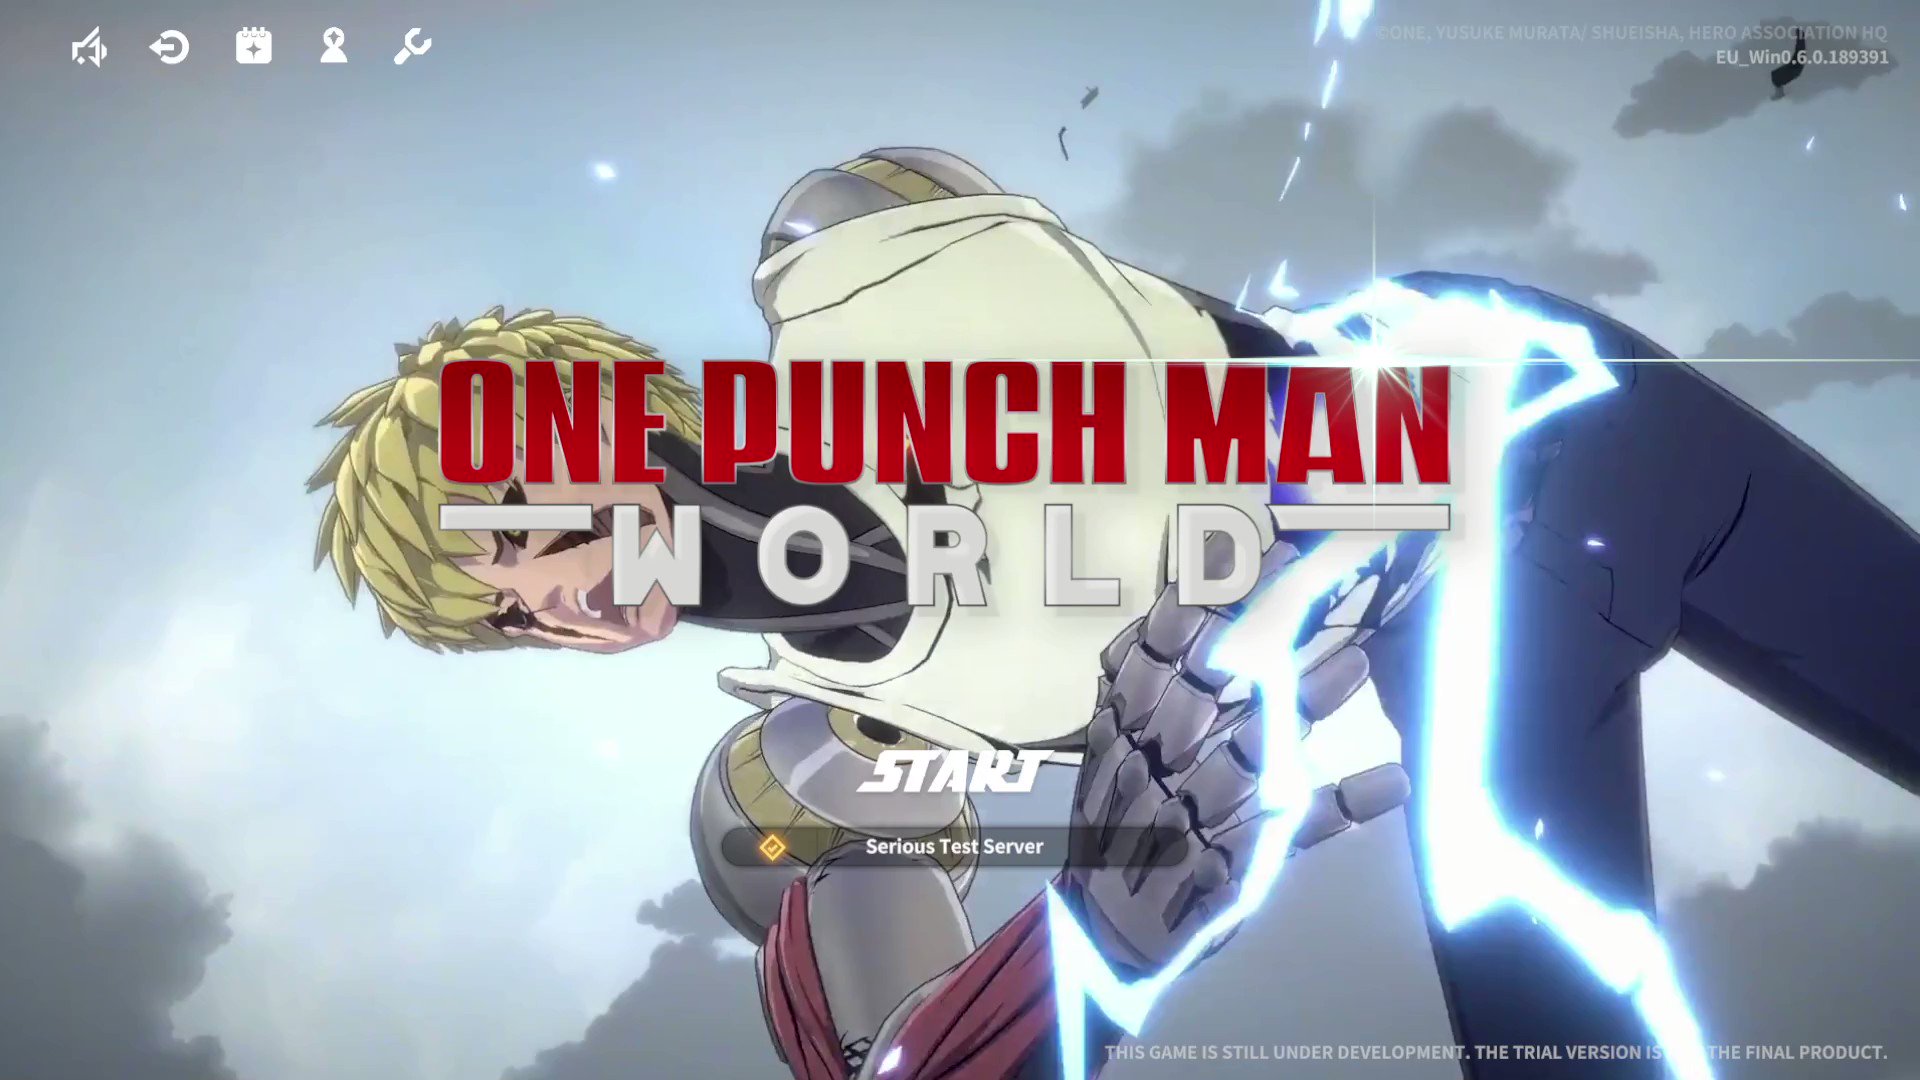 A One Punch Man: World Video Game Is In The Works